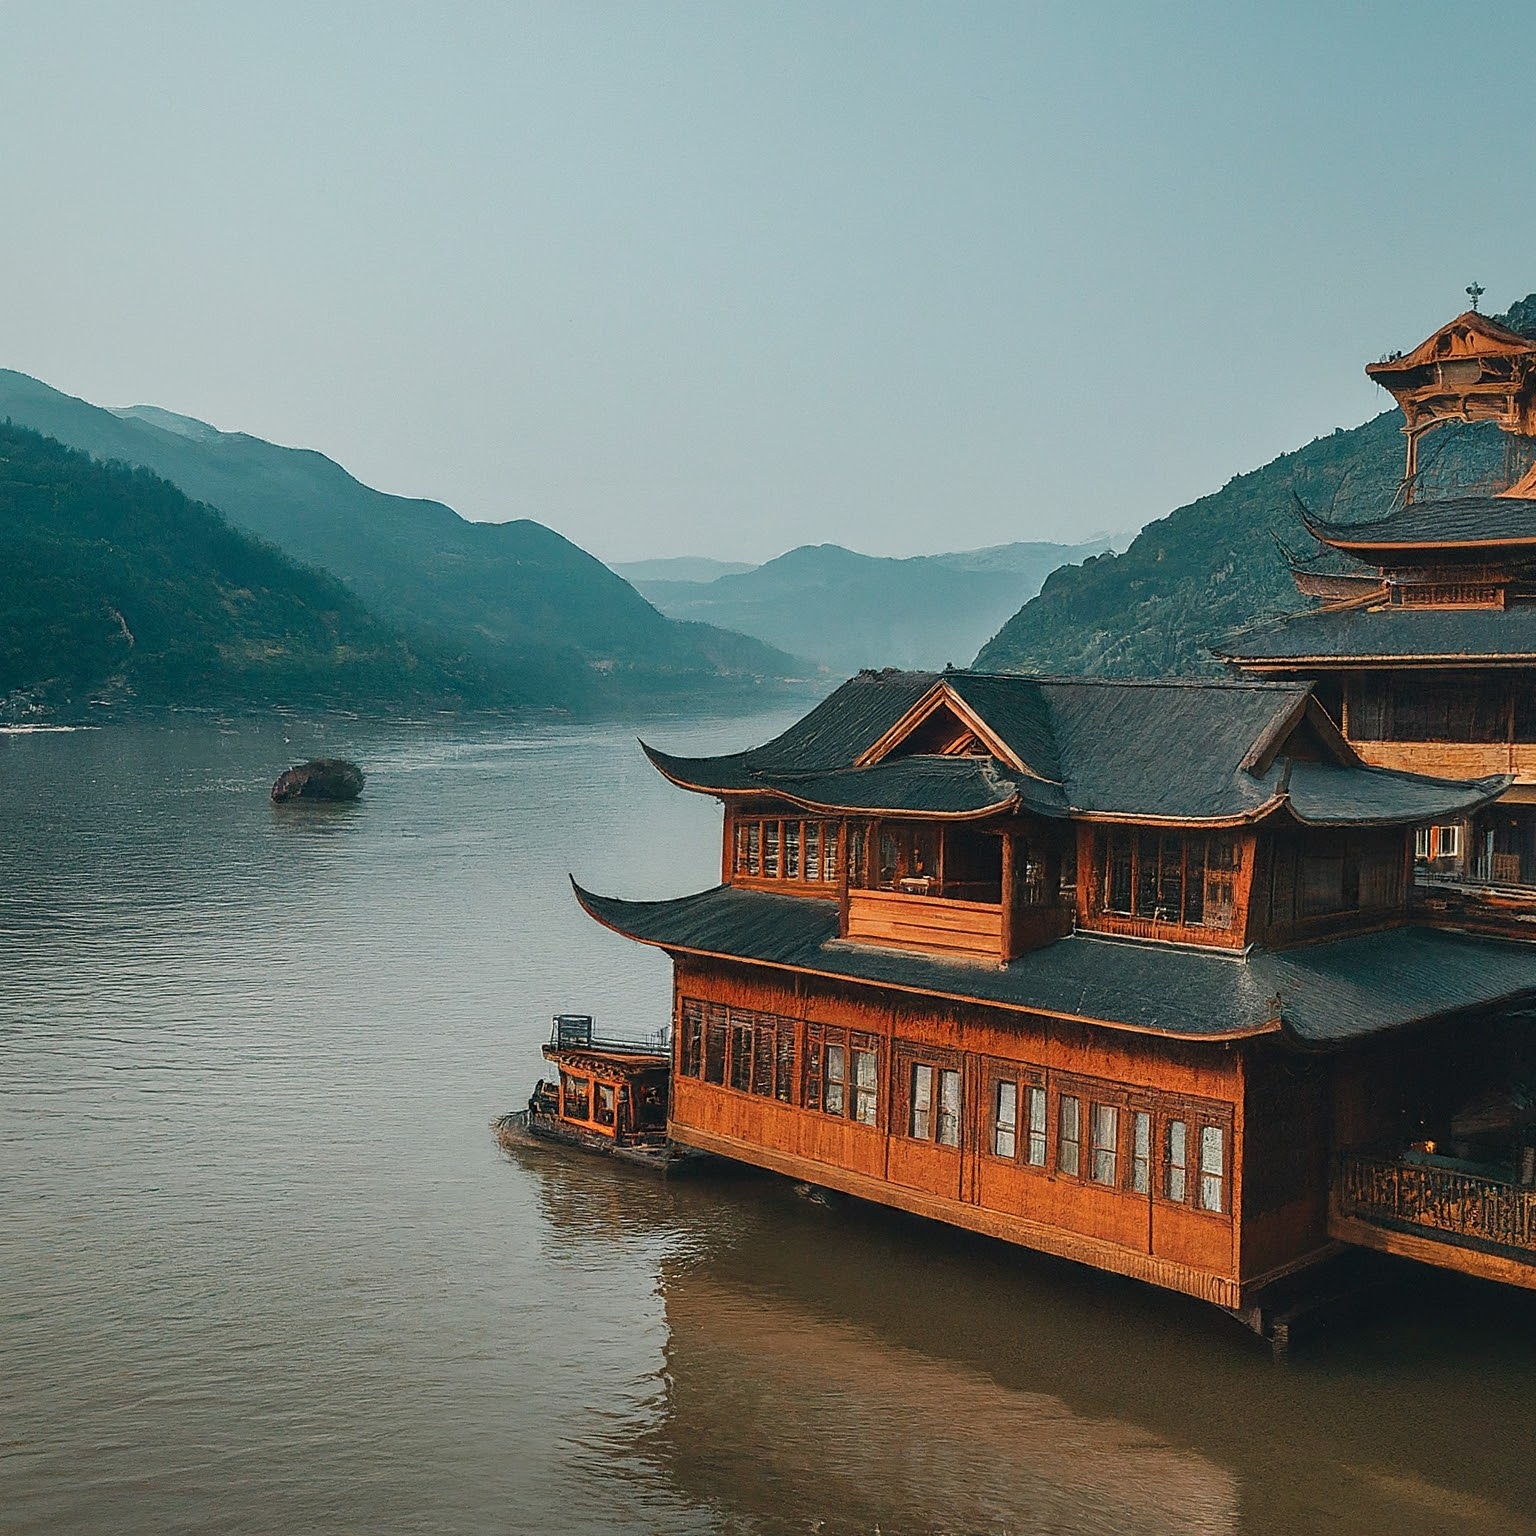 Traditional stilted house along the Jialing River in Chongqing, China, with boats and mountains.